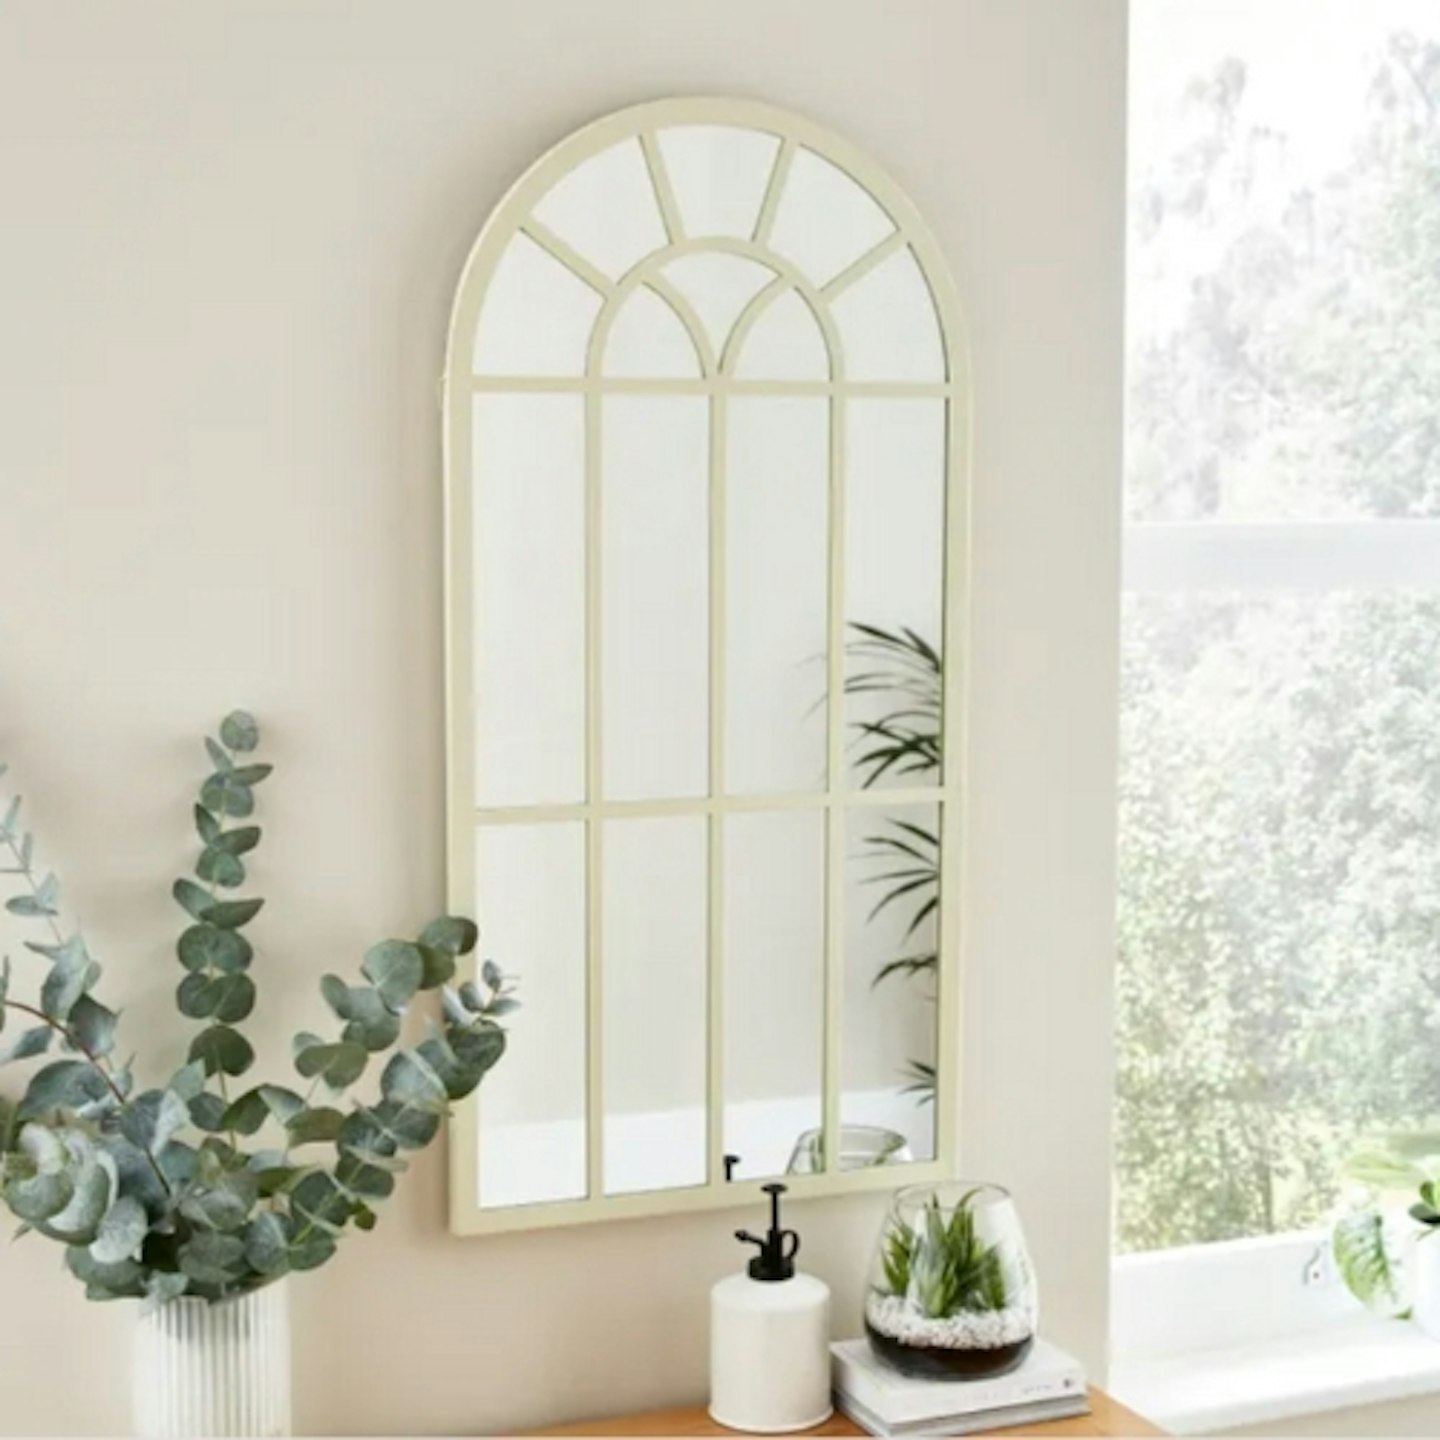 Dunelm Country Arched Window Indoor Outdoor Wall Mirror